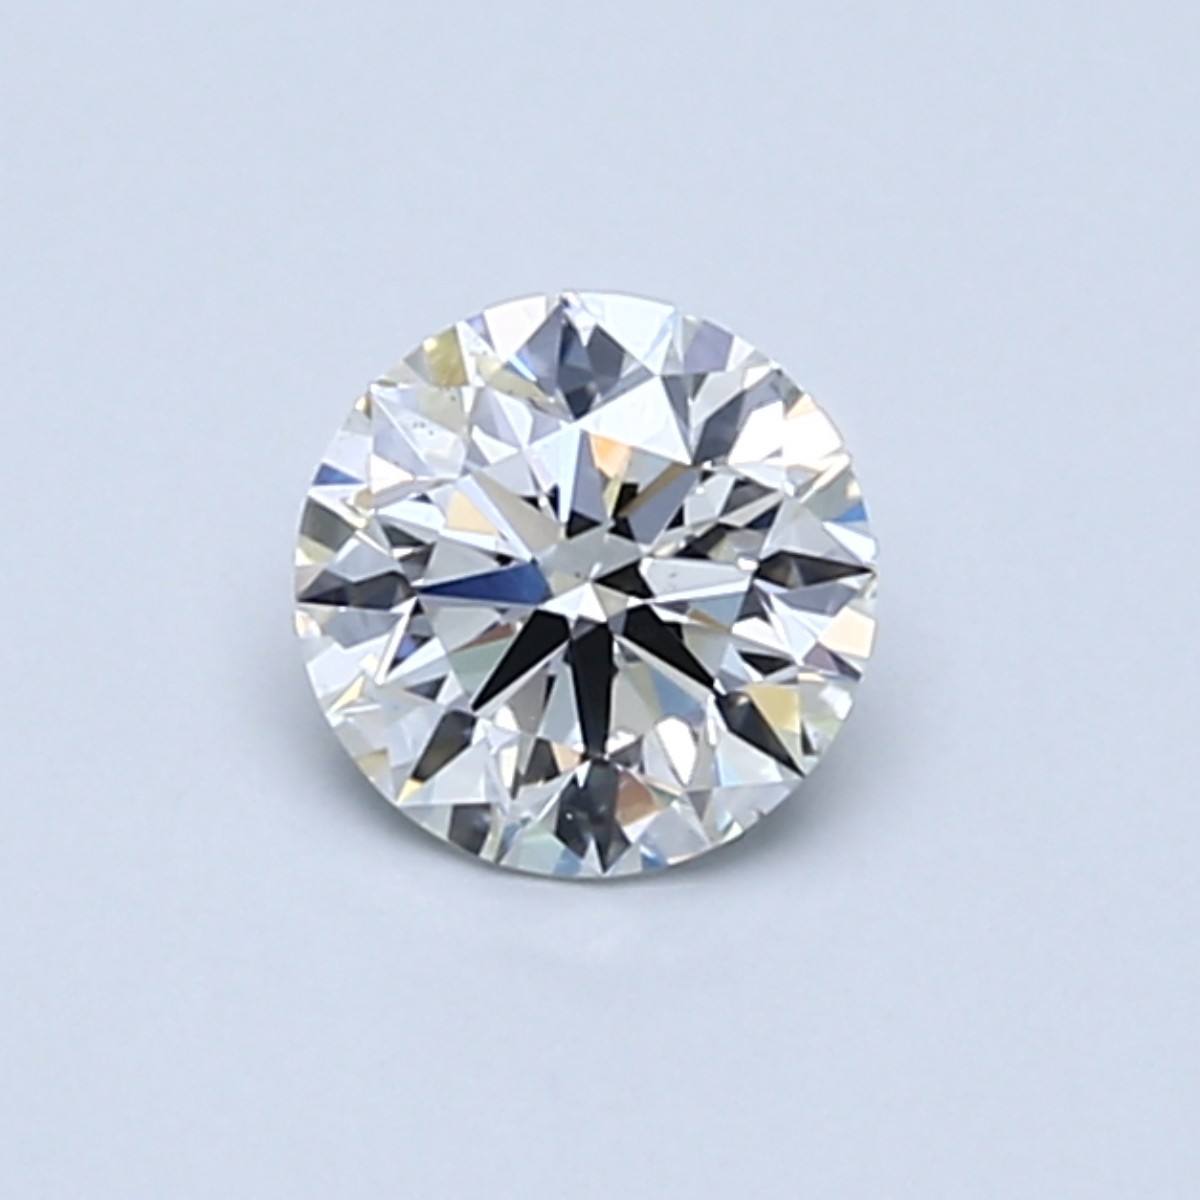 Round 0.58 Carat G Color VS2 Clarity For Sale